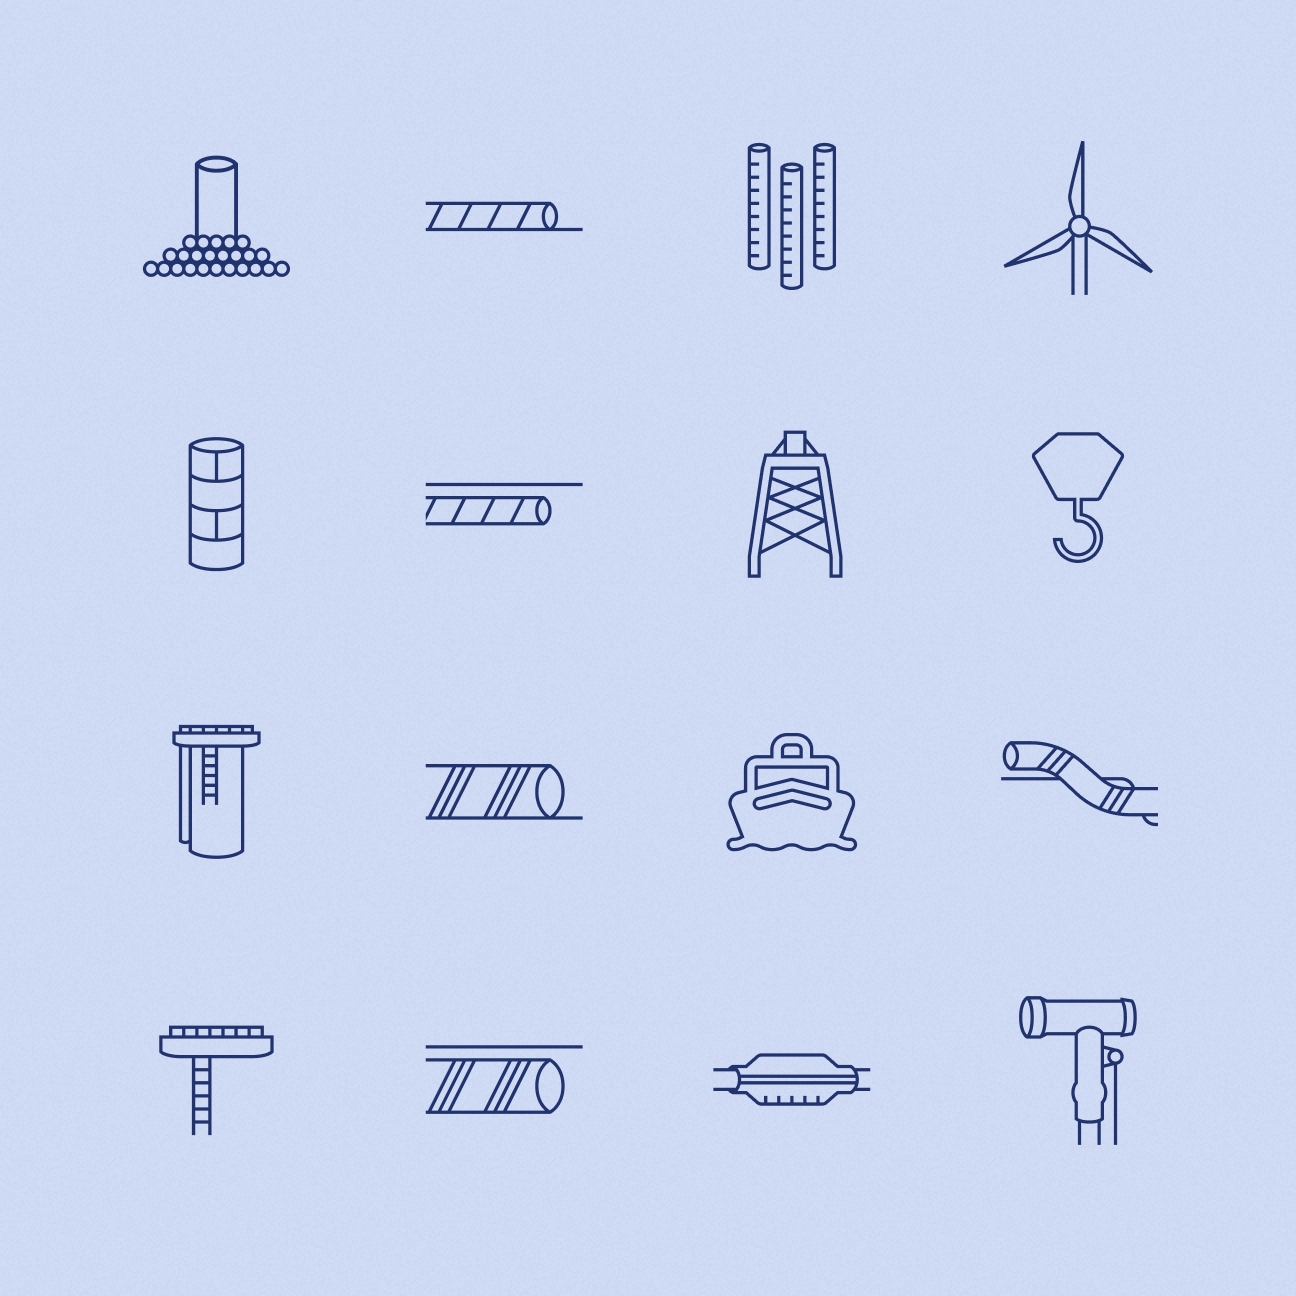 The designs of 16 different icons are shown.